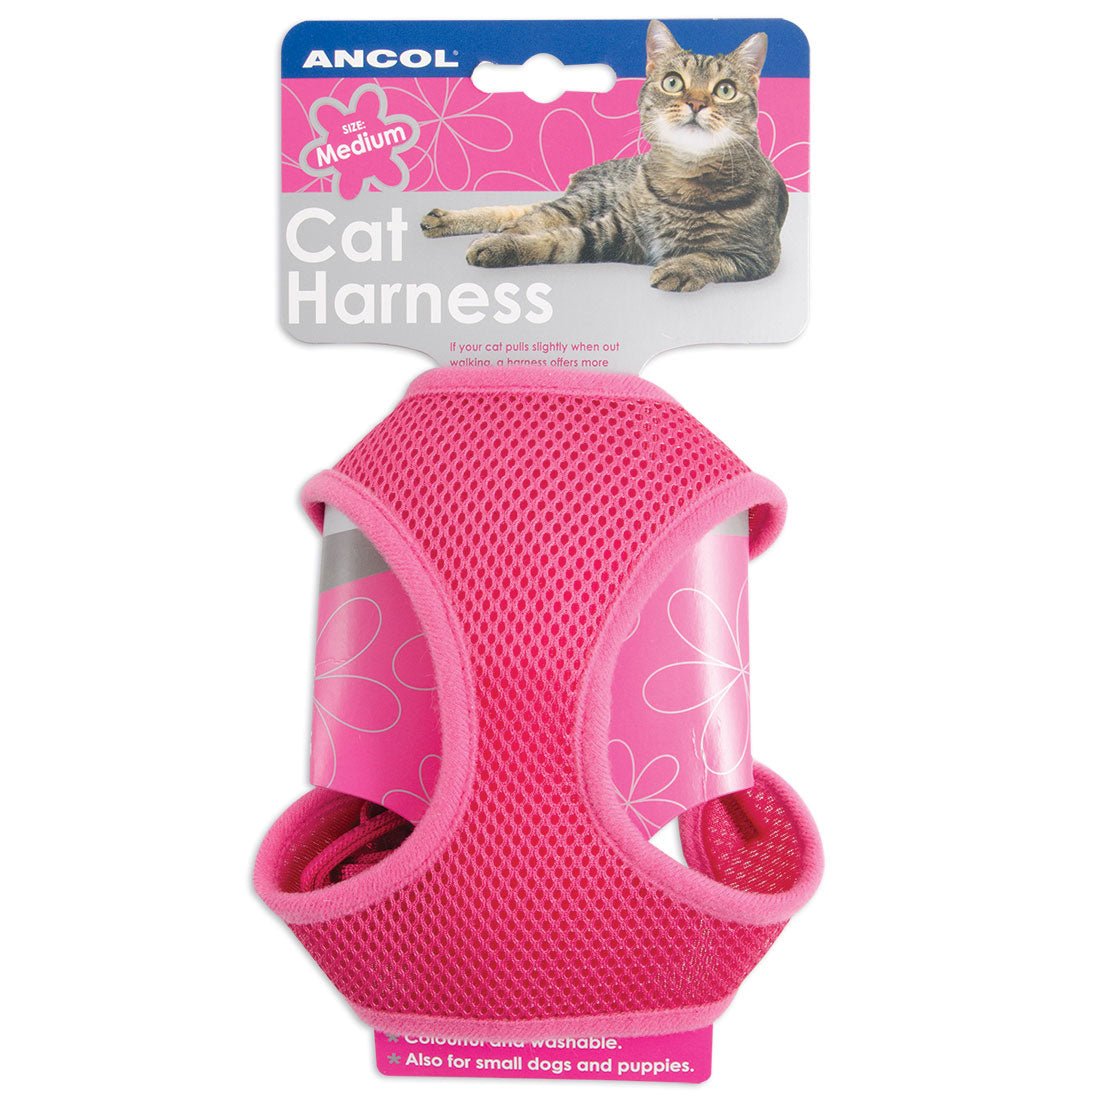 Ancol Soft Cat Harness Pink - Small Small, Ancol,